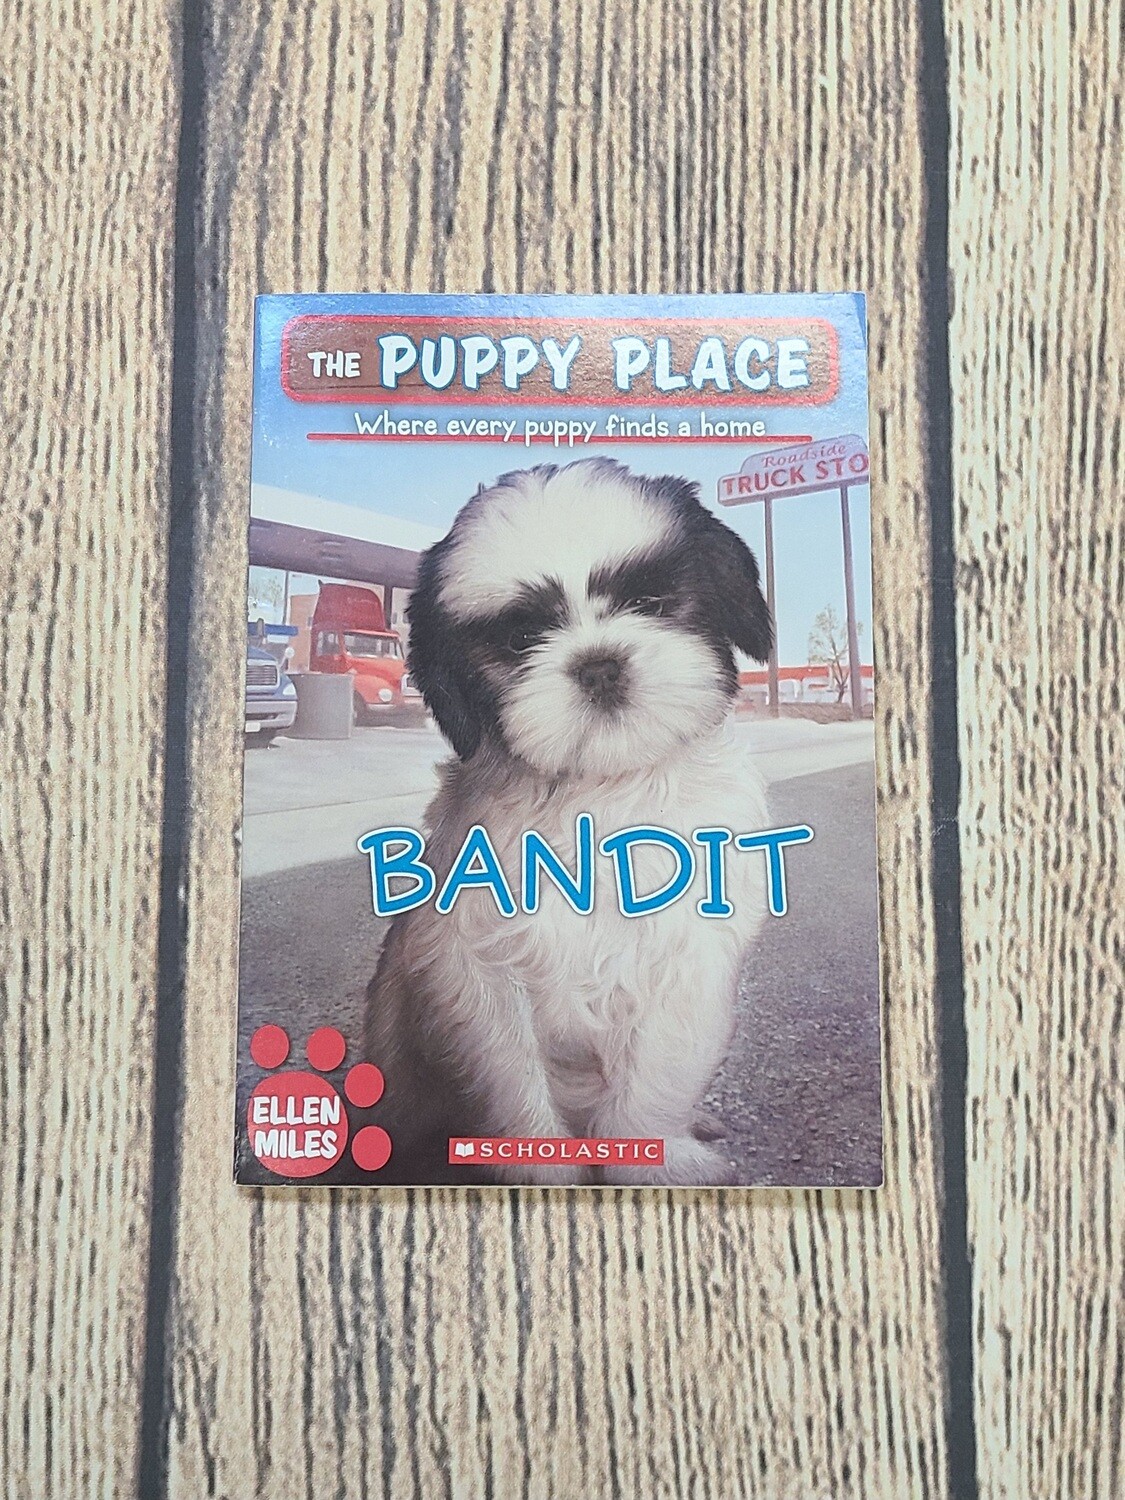 The Puppy Place: Bandit by Ellen Miles - Paperback - Great Condition